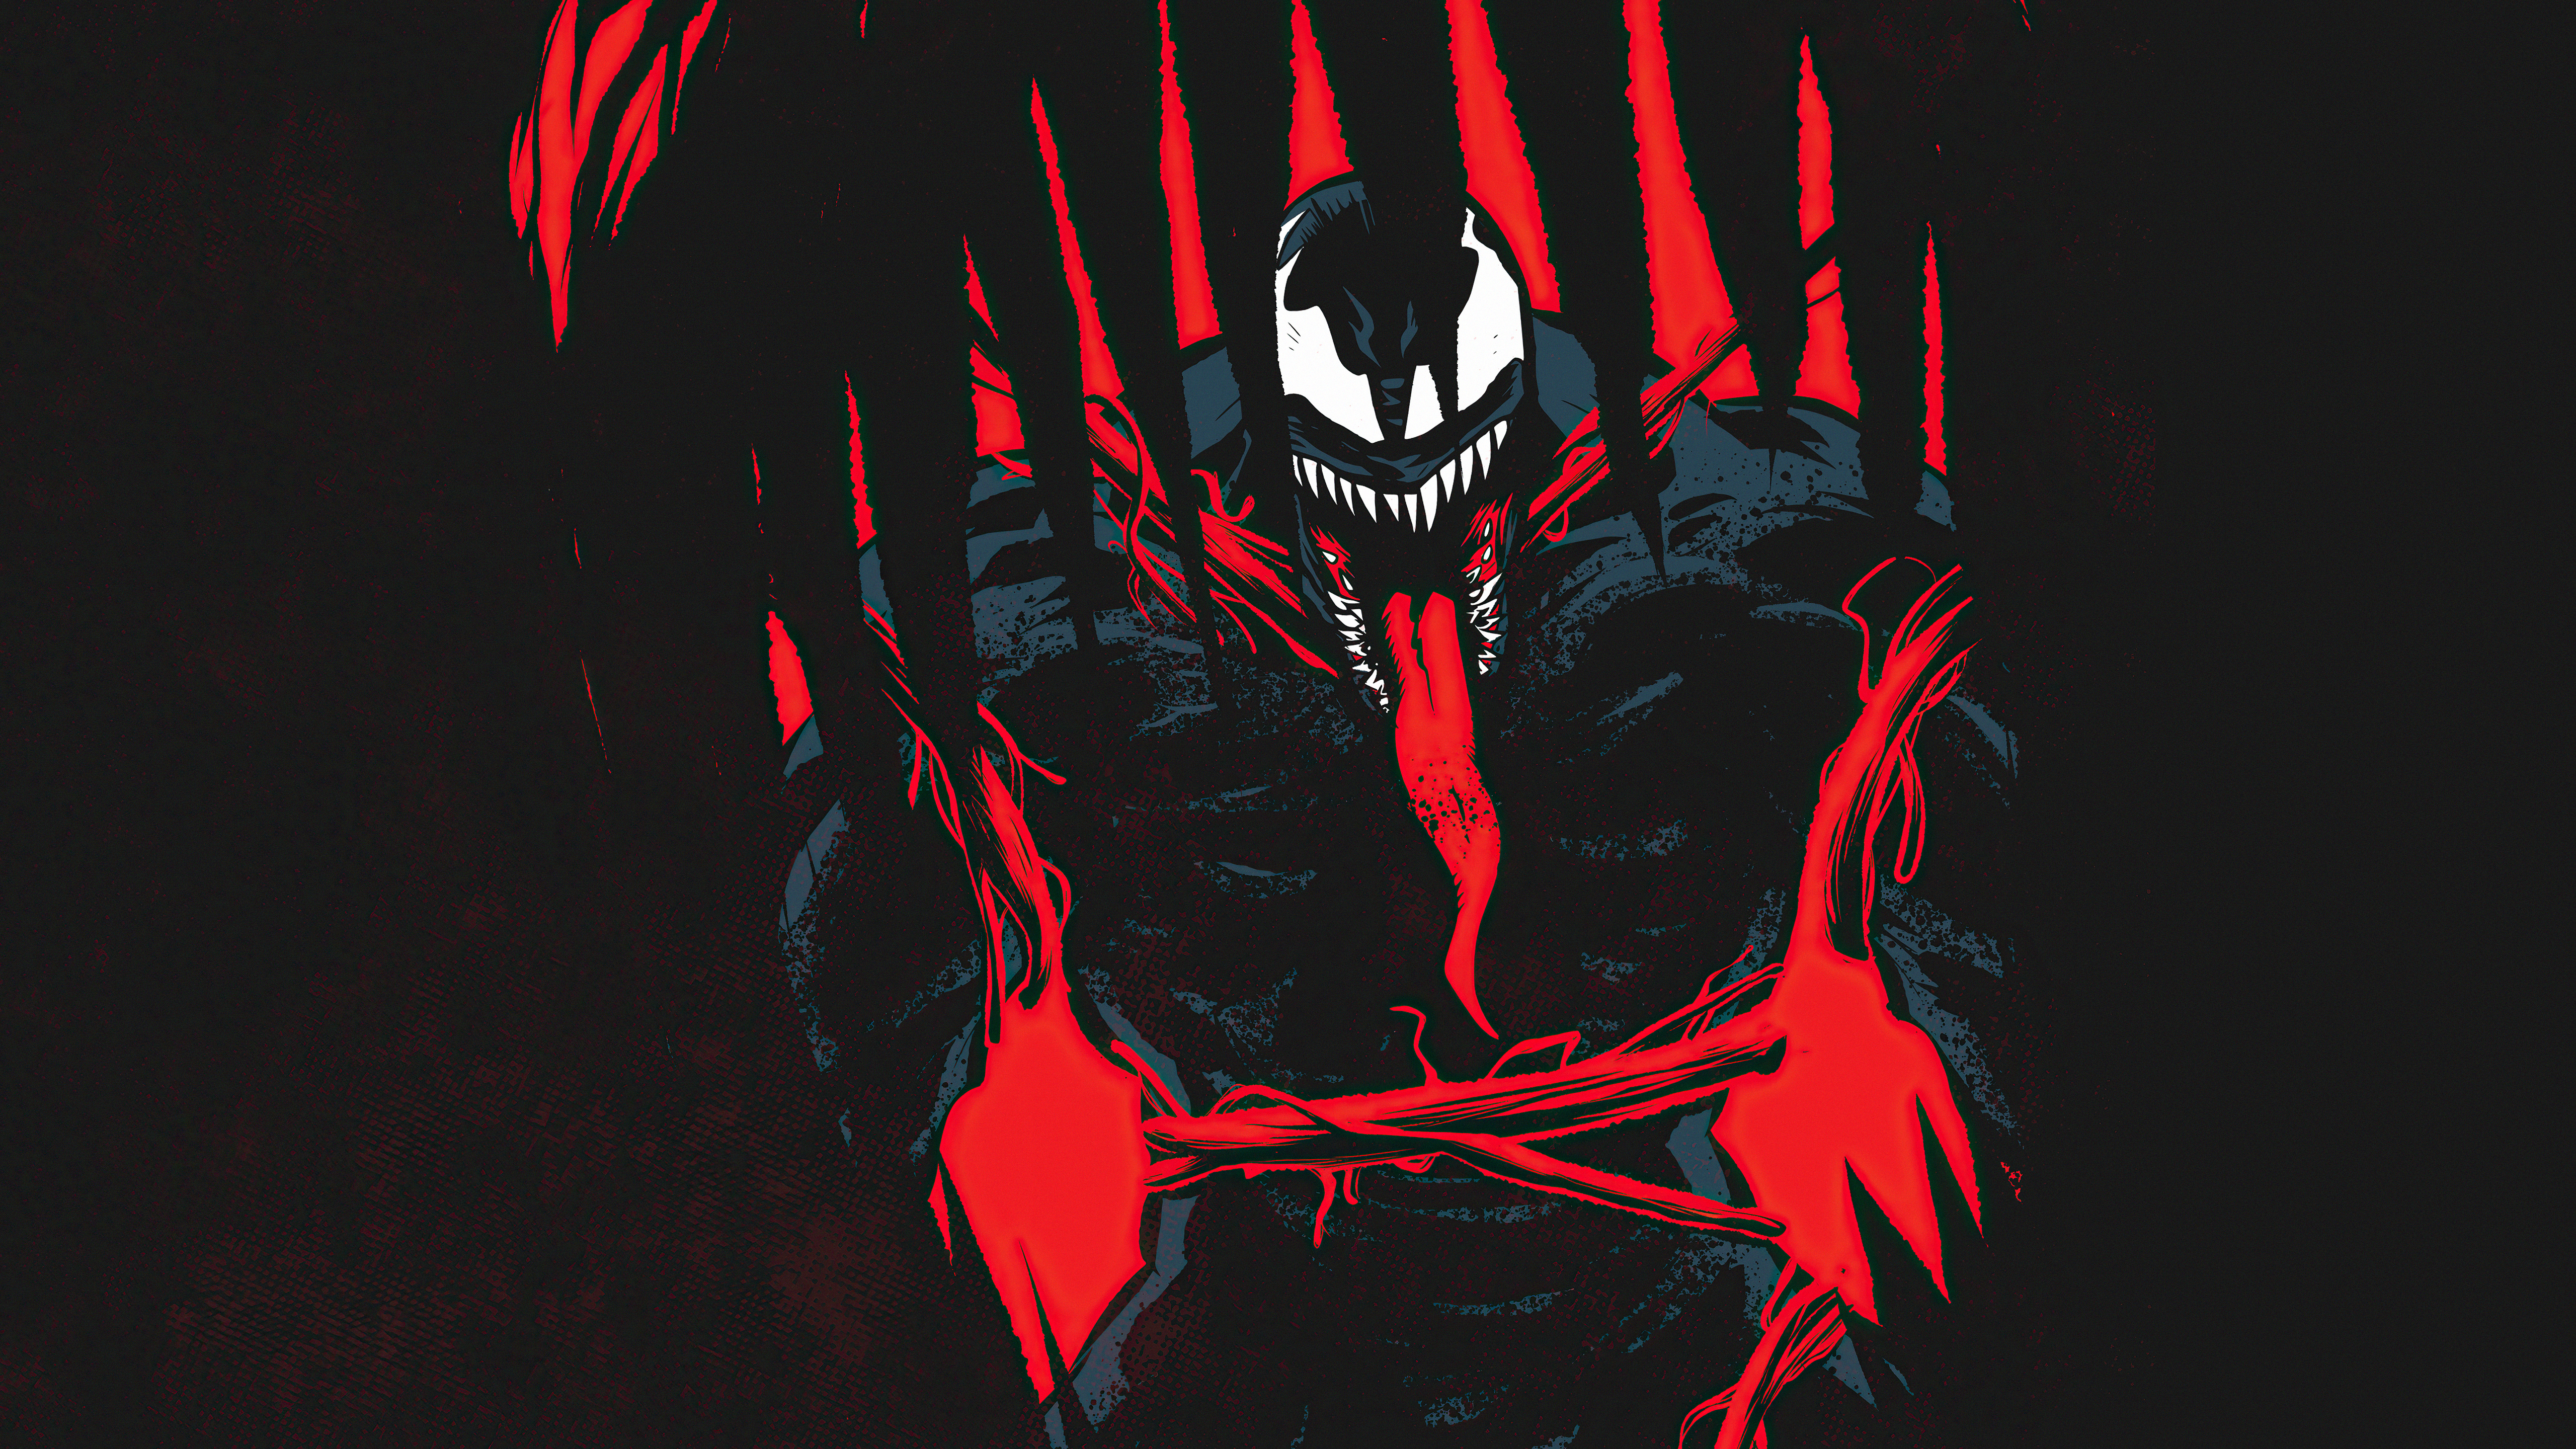 Venom 2 Let There Be Carnage Logo Wallpapers